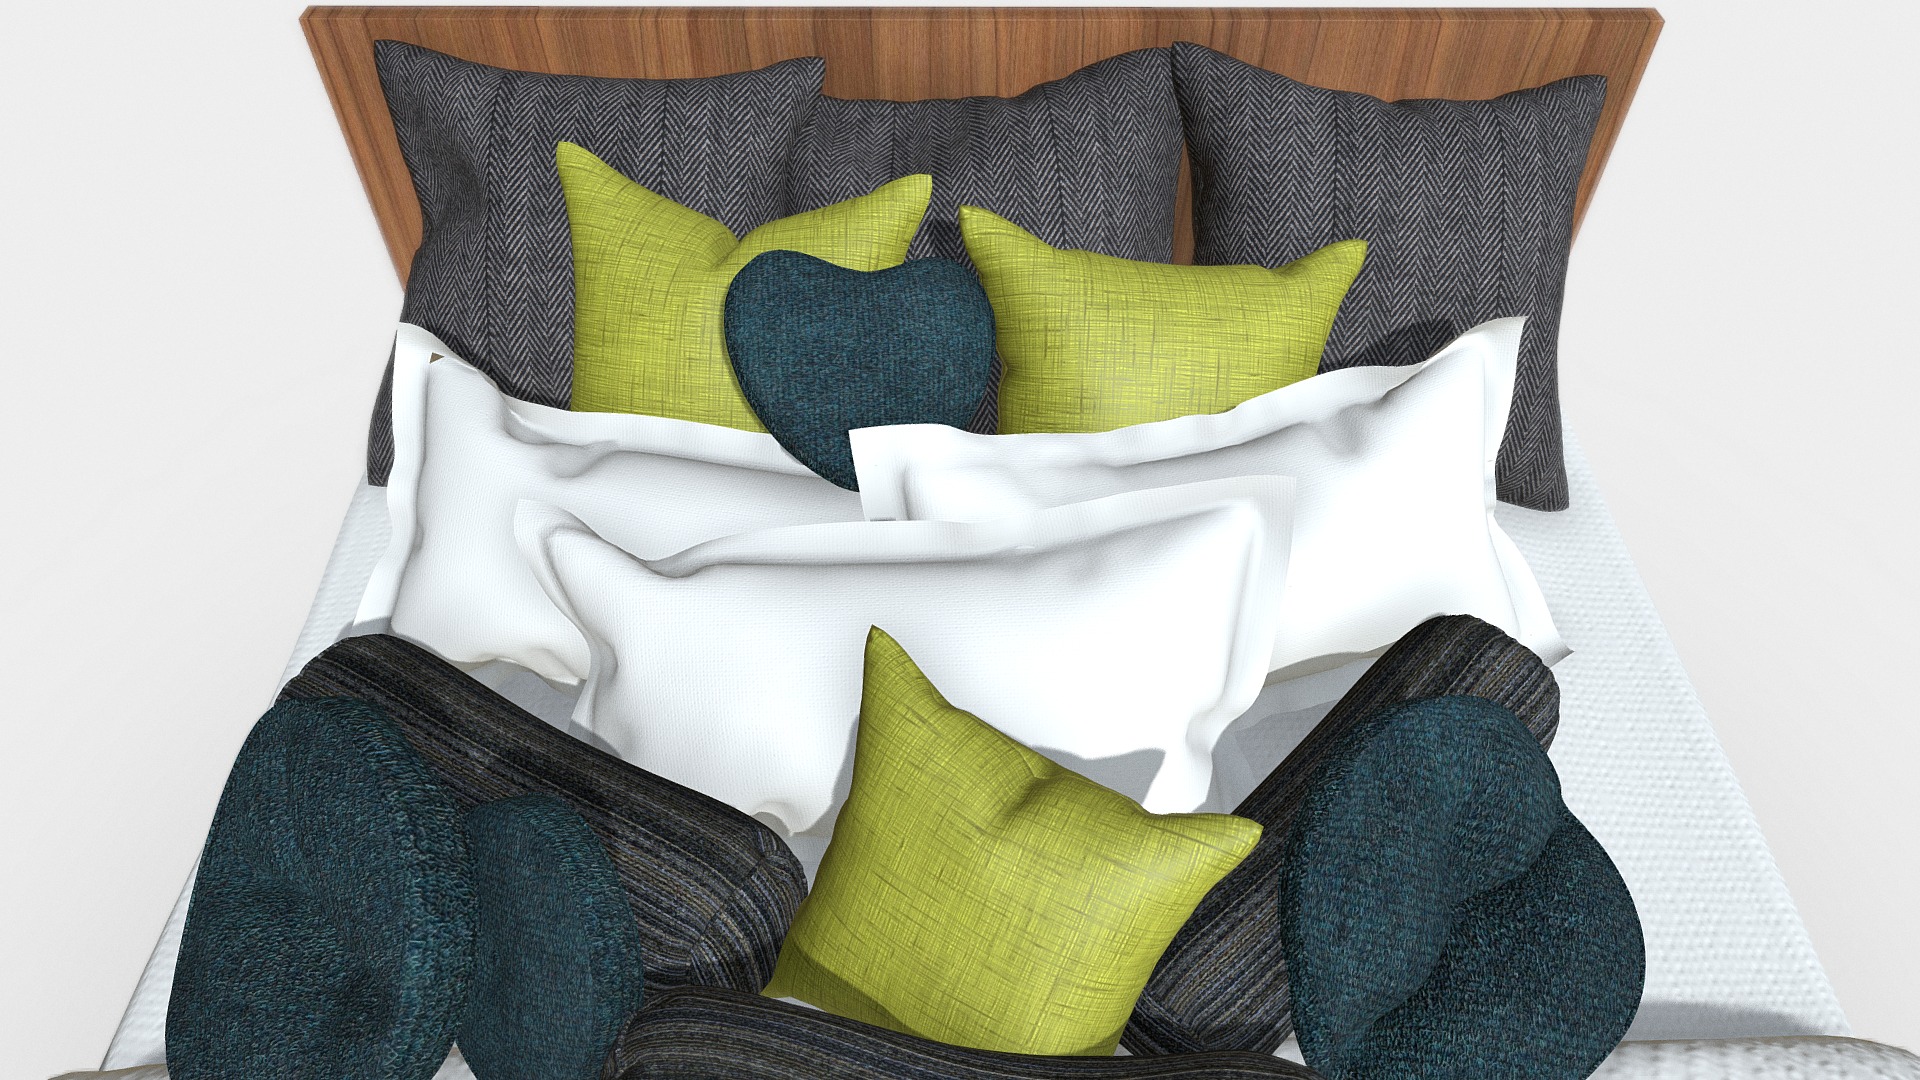 3D model Bed, Pillows & Beyond - This is a 3D model of the Bed, Pillows & Beyond. The 3D model is about a bed with a white and green pillow and a black and yellow striped blanket.